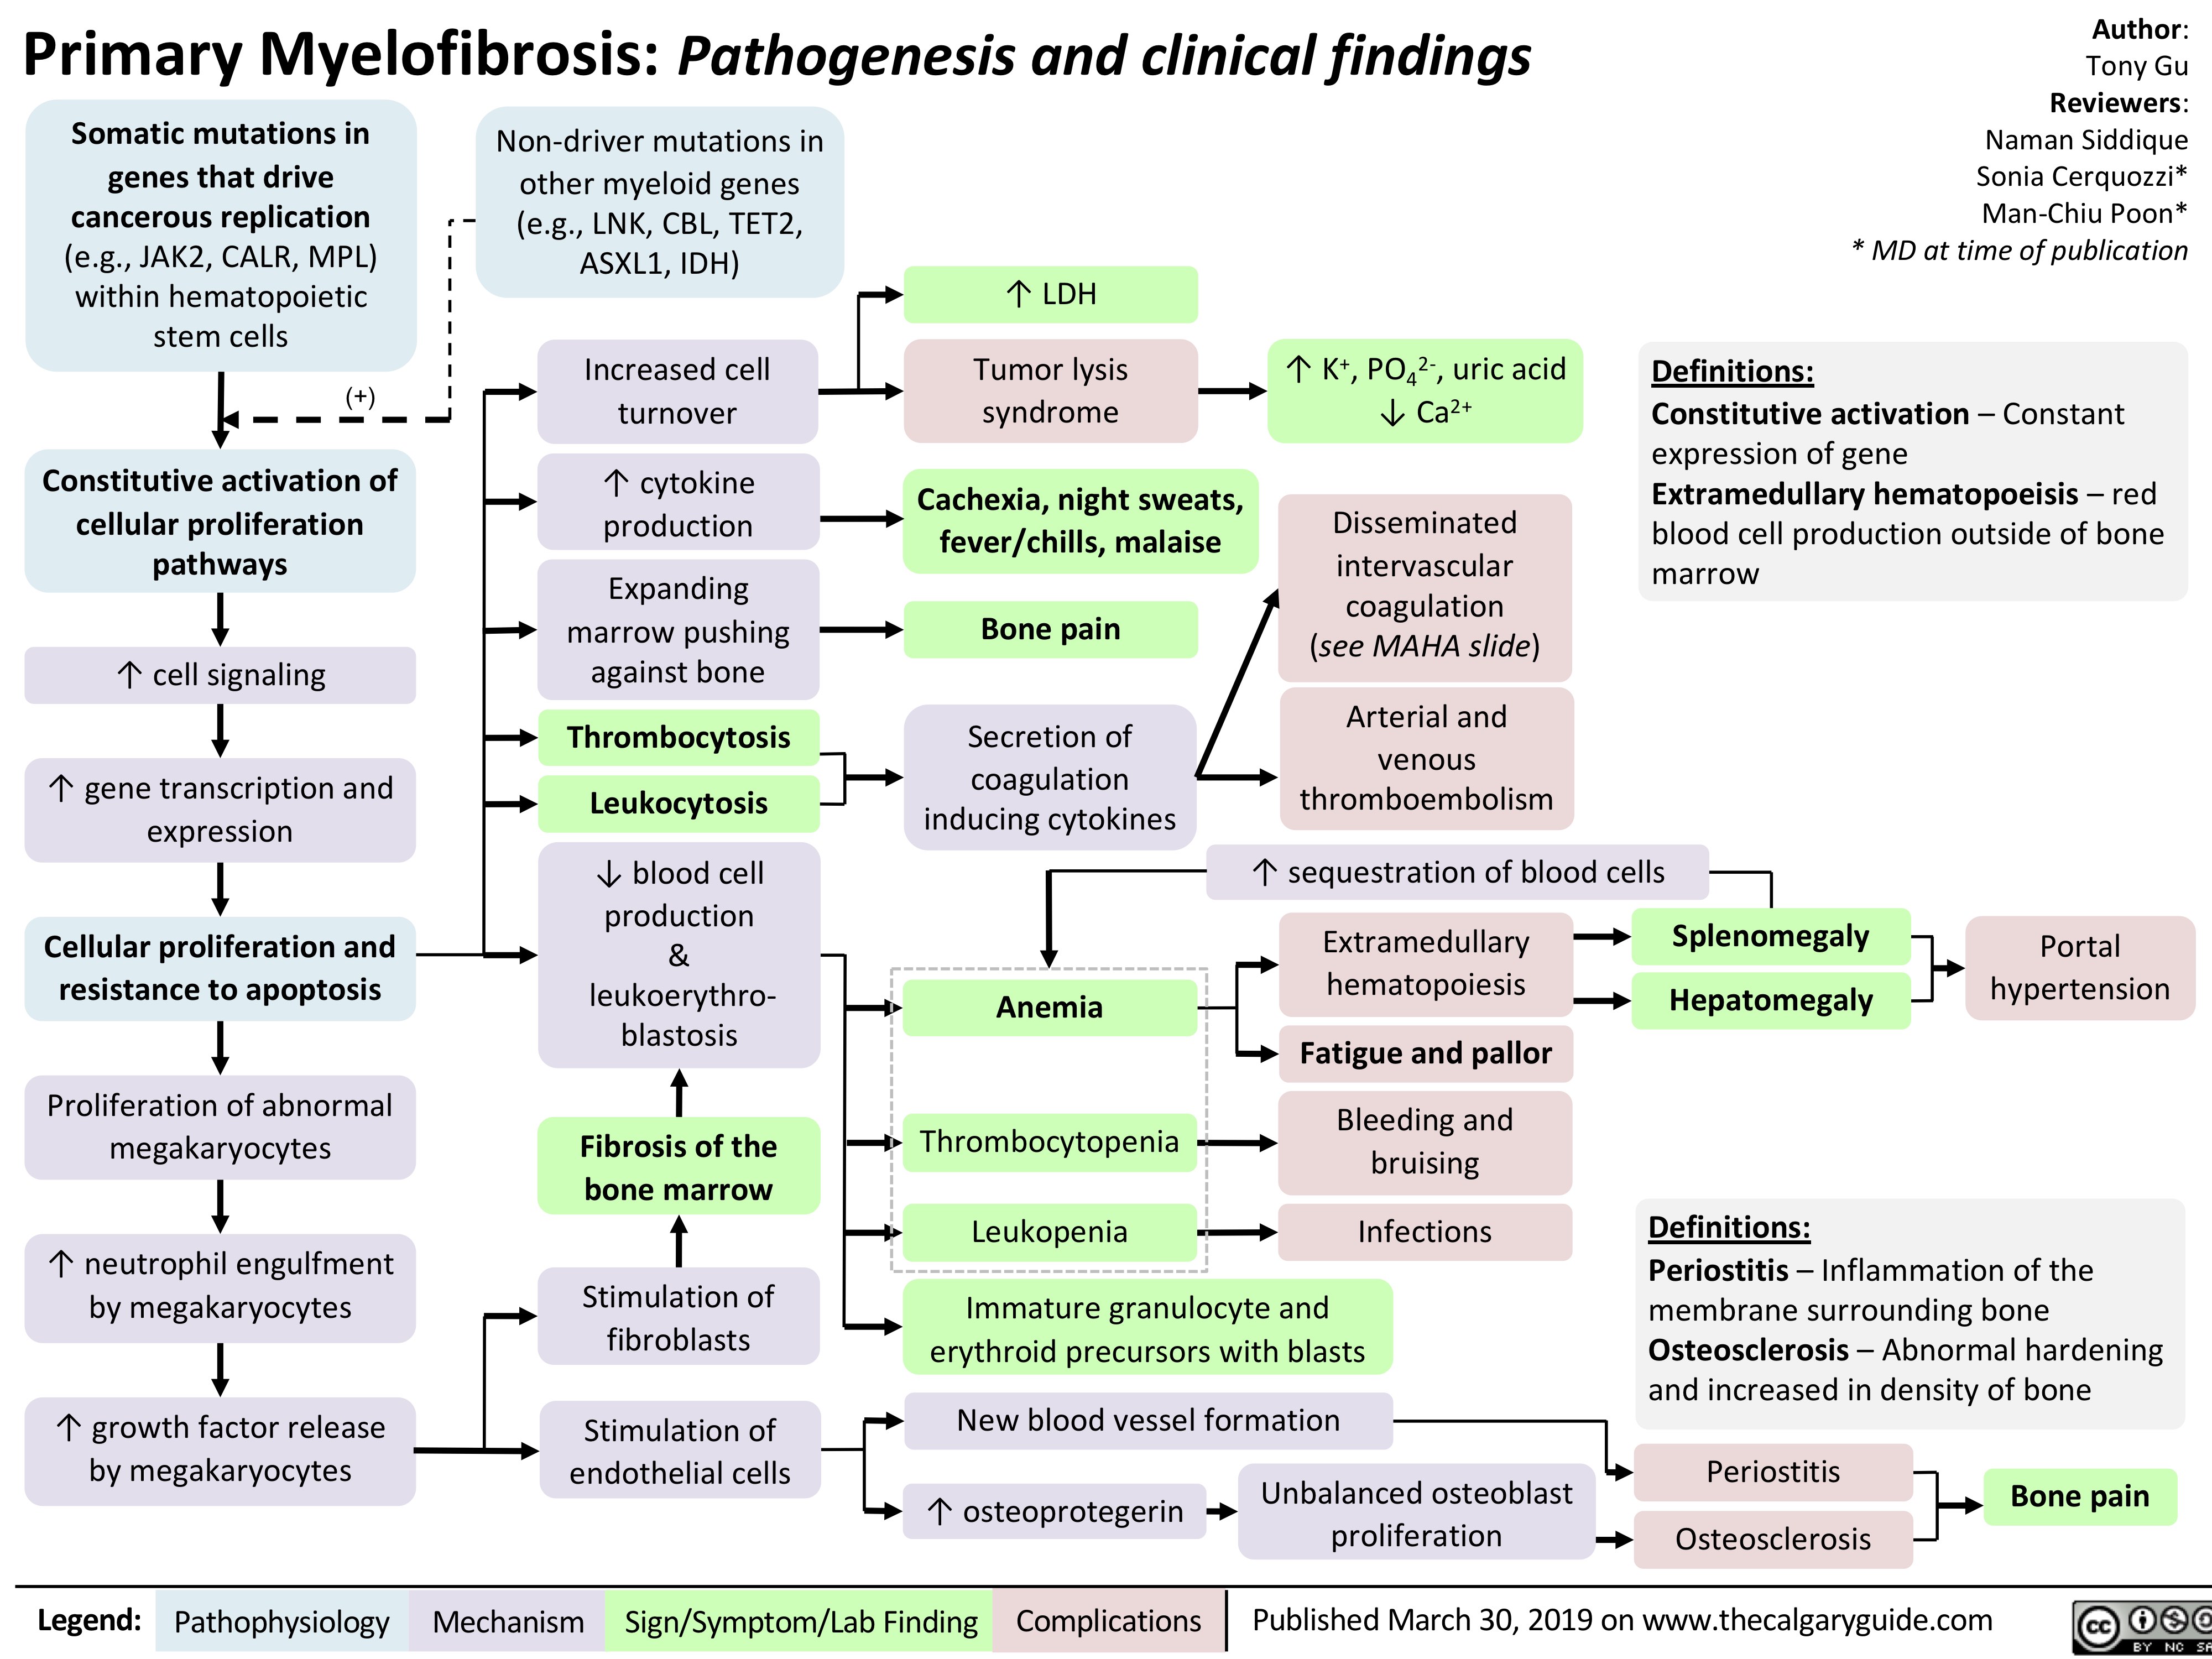 Primary Myelofibrosis: Pathogenesis and clinical findings
Legend: Published March 30, 2019 on www.Pathophysiology Mechanism Sign/Symptom/Lab Finding Complications thecalgaryguide.com
Author:
Tony Gu
Reviewers:
Naman Siddique
Sonia Cerquozzi*
Man-Chiu Poon*
* MD at time of publication
Definitions:
Constitutive activation – Constant
expression of gene
Extramedullary hematopoeisis – red
blood cell production outside of bone
marrow
Somatic mutations in
genes that drive
cancerous replication
(e.g., JAK2, CALR, MPL)
within hematopoietic
stem cells
Non-driver mutations in
other myeloid genes
(e.g., LNK, CBL, TET2,
ASXL1, IDH)
Constitutive activation of
cellular proliferation
pathways
↑ cell signaling
↑ gene transcription and
expression
Cellular proliferation and
resistance to apoptosis
Proliferation of abnormal
megakaryocytes
↑ neutrophil engulfment
by megakaryocytes
↑ growth factor release
by megakaryocytes
Stimulation of
fibroblasts
Stimulation of
endothelial cells
New blood vessel formation
↑ osteoprotegerin Unbalanced osteoblast
proliferation Osteosclerosis
Fibrosis of the
bone marrow
Anemia
Bleeding and
bruising
Infections
Fatigue and pallor
Bone pain
Increased cell
turnover
Tumor lysis
syndrome
Cachexia, night sweats,
fever/chills, malaise
Expanding
marrow pushing
against bone
Extramedullary
hematopoiesis Hepatomegaly
Portal
hypertension
Splenomegaly
↑ LDH
Thrombocytosis
Leukocytosis
Secretion of
coagulation
inducing cytokines
Arterial and
venous
thromboembolism
↓ blood cell
production
&
leukoerythroblastosis
Thrombocytopenia
Leukopenia
↑ K+, PO4
2-, uric acid
↓ Ca2+
Bone pain
Periostitis
Immature granulocyte and
erythroid precursors with blasts
↑ cytokine
production
(+)
↑ sequestration of blood cells
Disseminated
intervascular
coagulation
(see MAHA slide)
Definitions:
Periostitis – Inflammation of the
membrane surrounding bone
Osteosclerosis – Abnormal hardening
and increased in density of bone